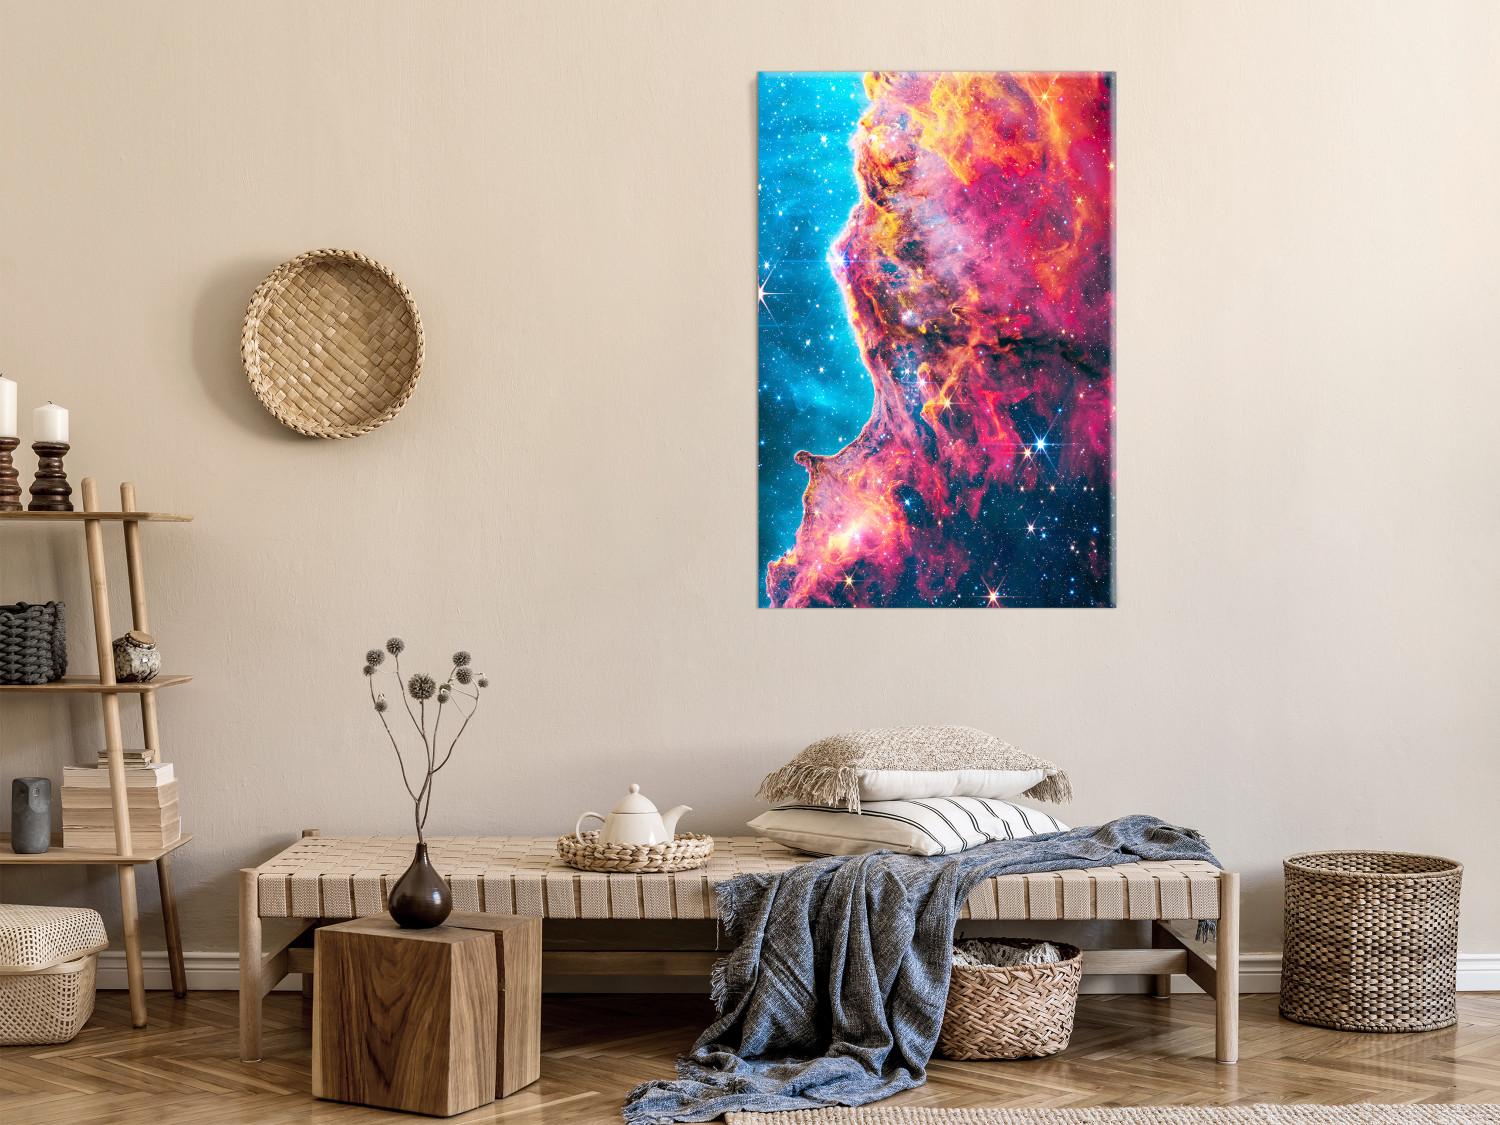 Canvas Carina Nebula - View of the Cosmos From Jamess Webb’s Telescope